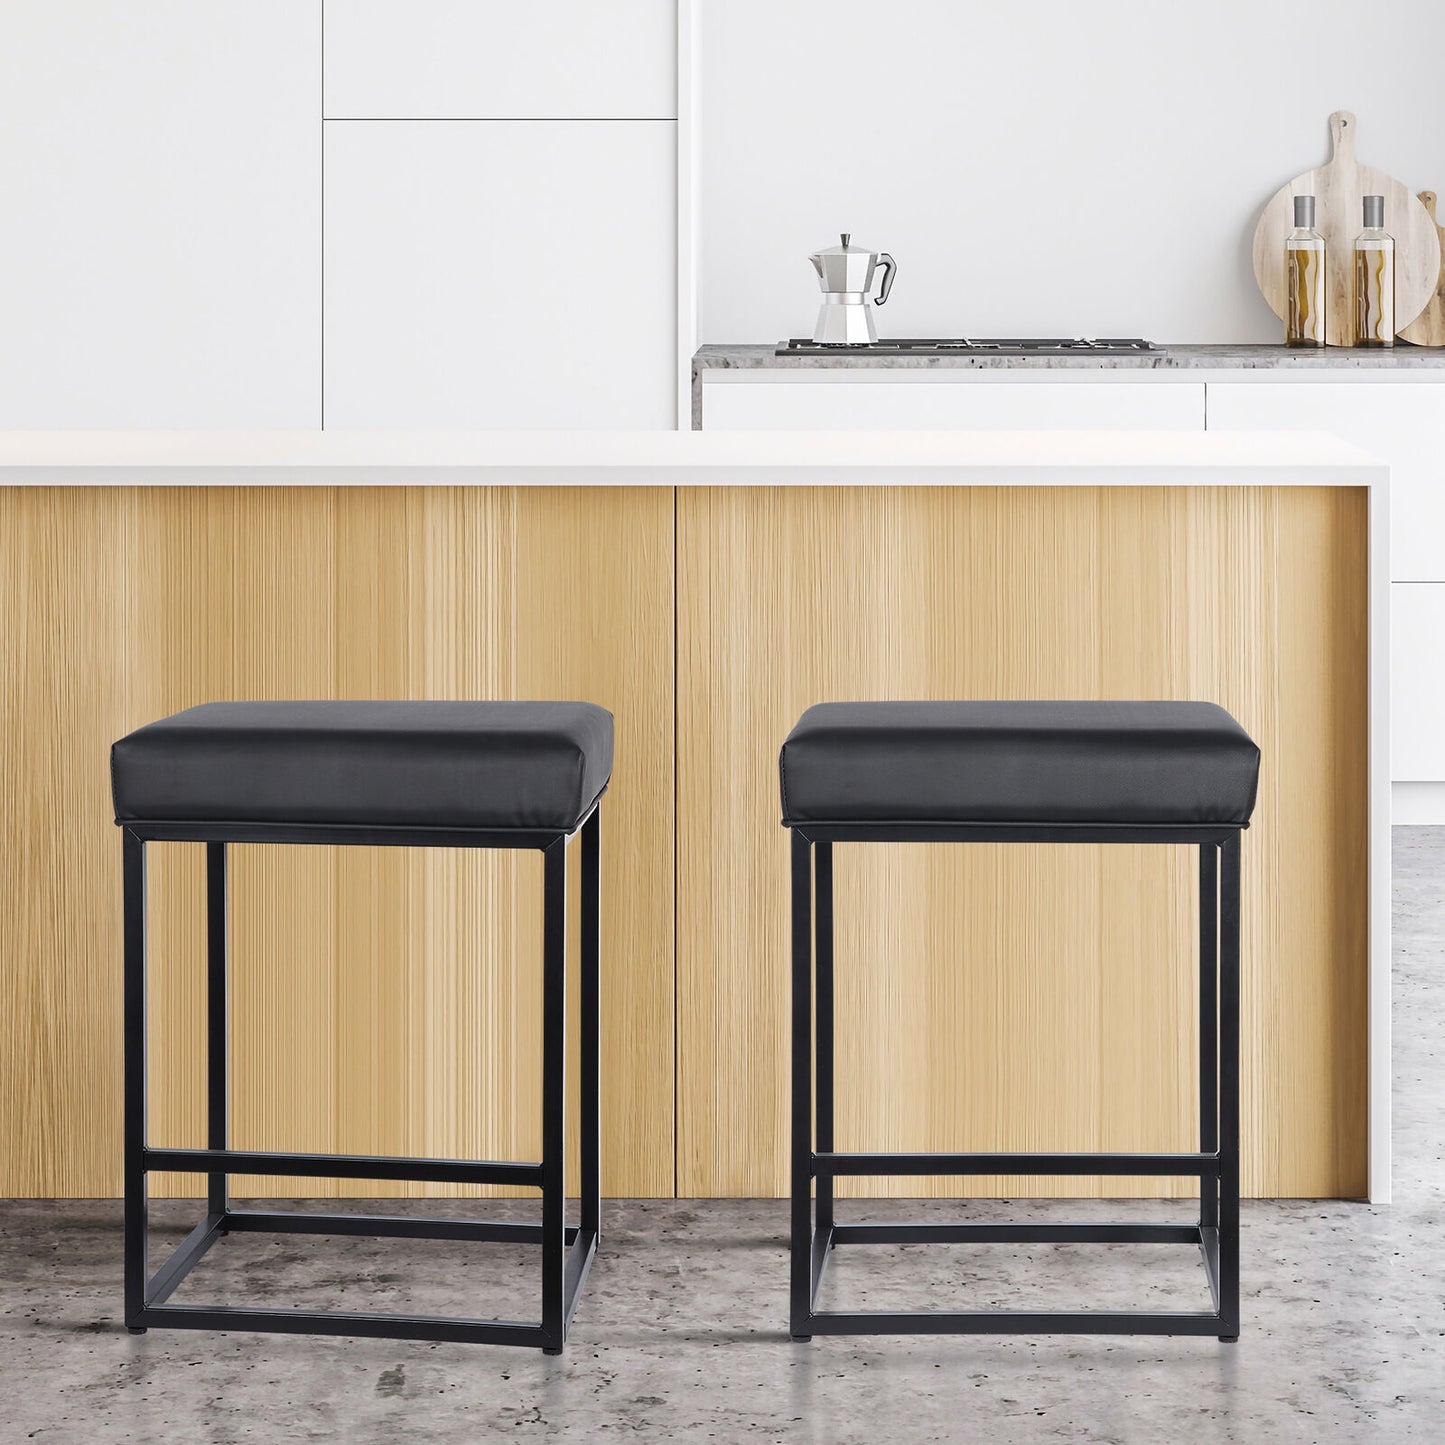 24" Set of 4 Counter Stools & Bar Stools Backless PU Leather With Footrest Black